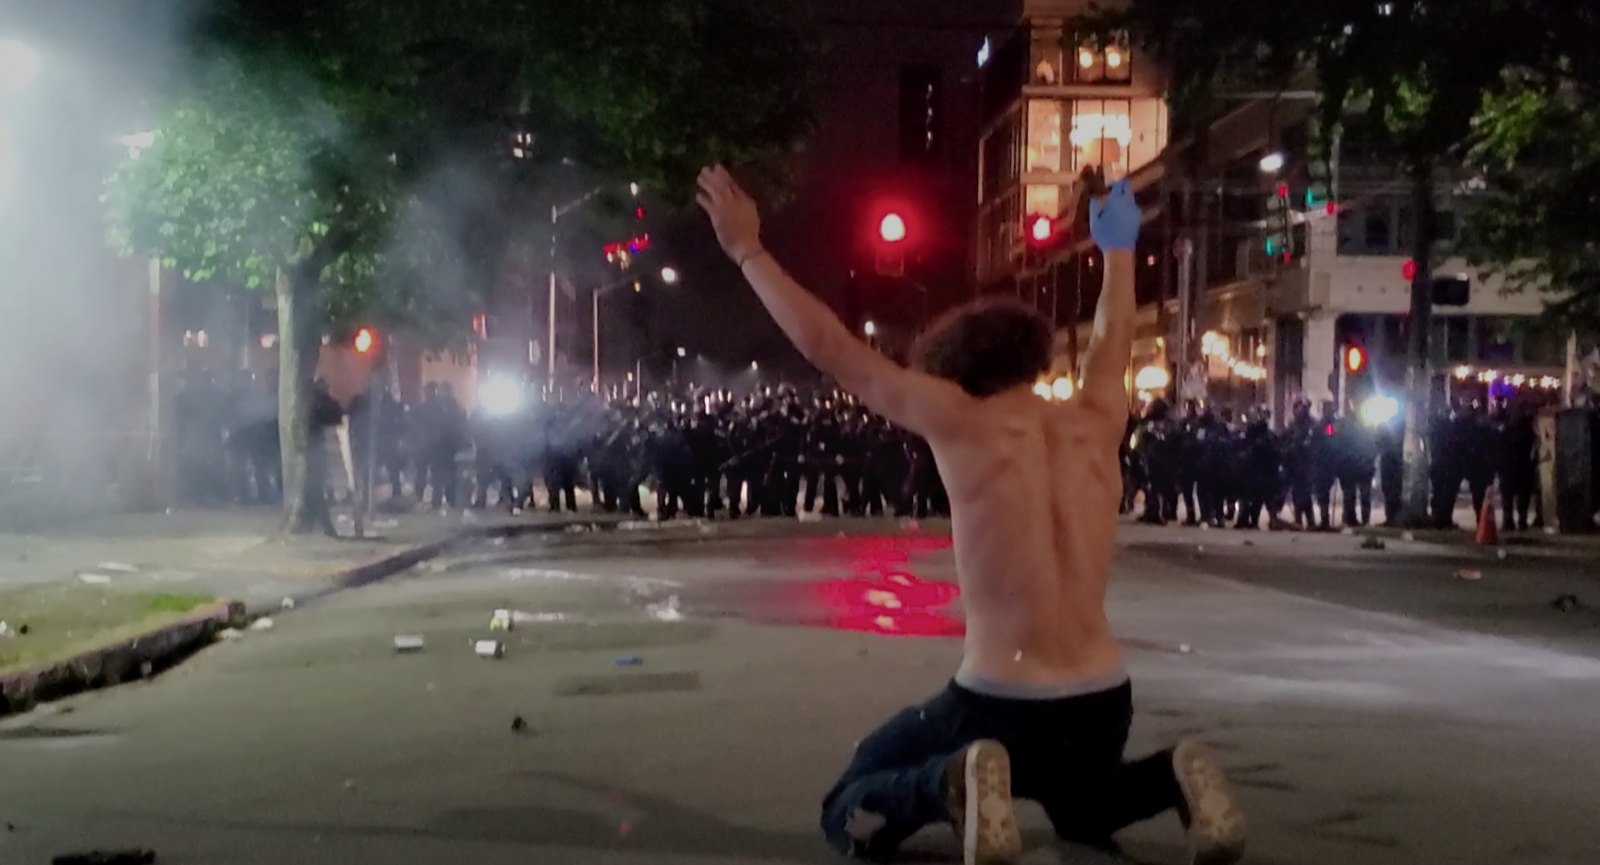 A protester kneels before a barricade of police officers in riot gear.